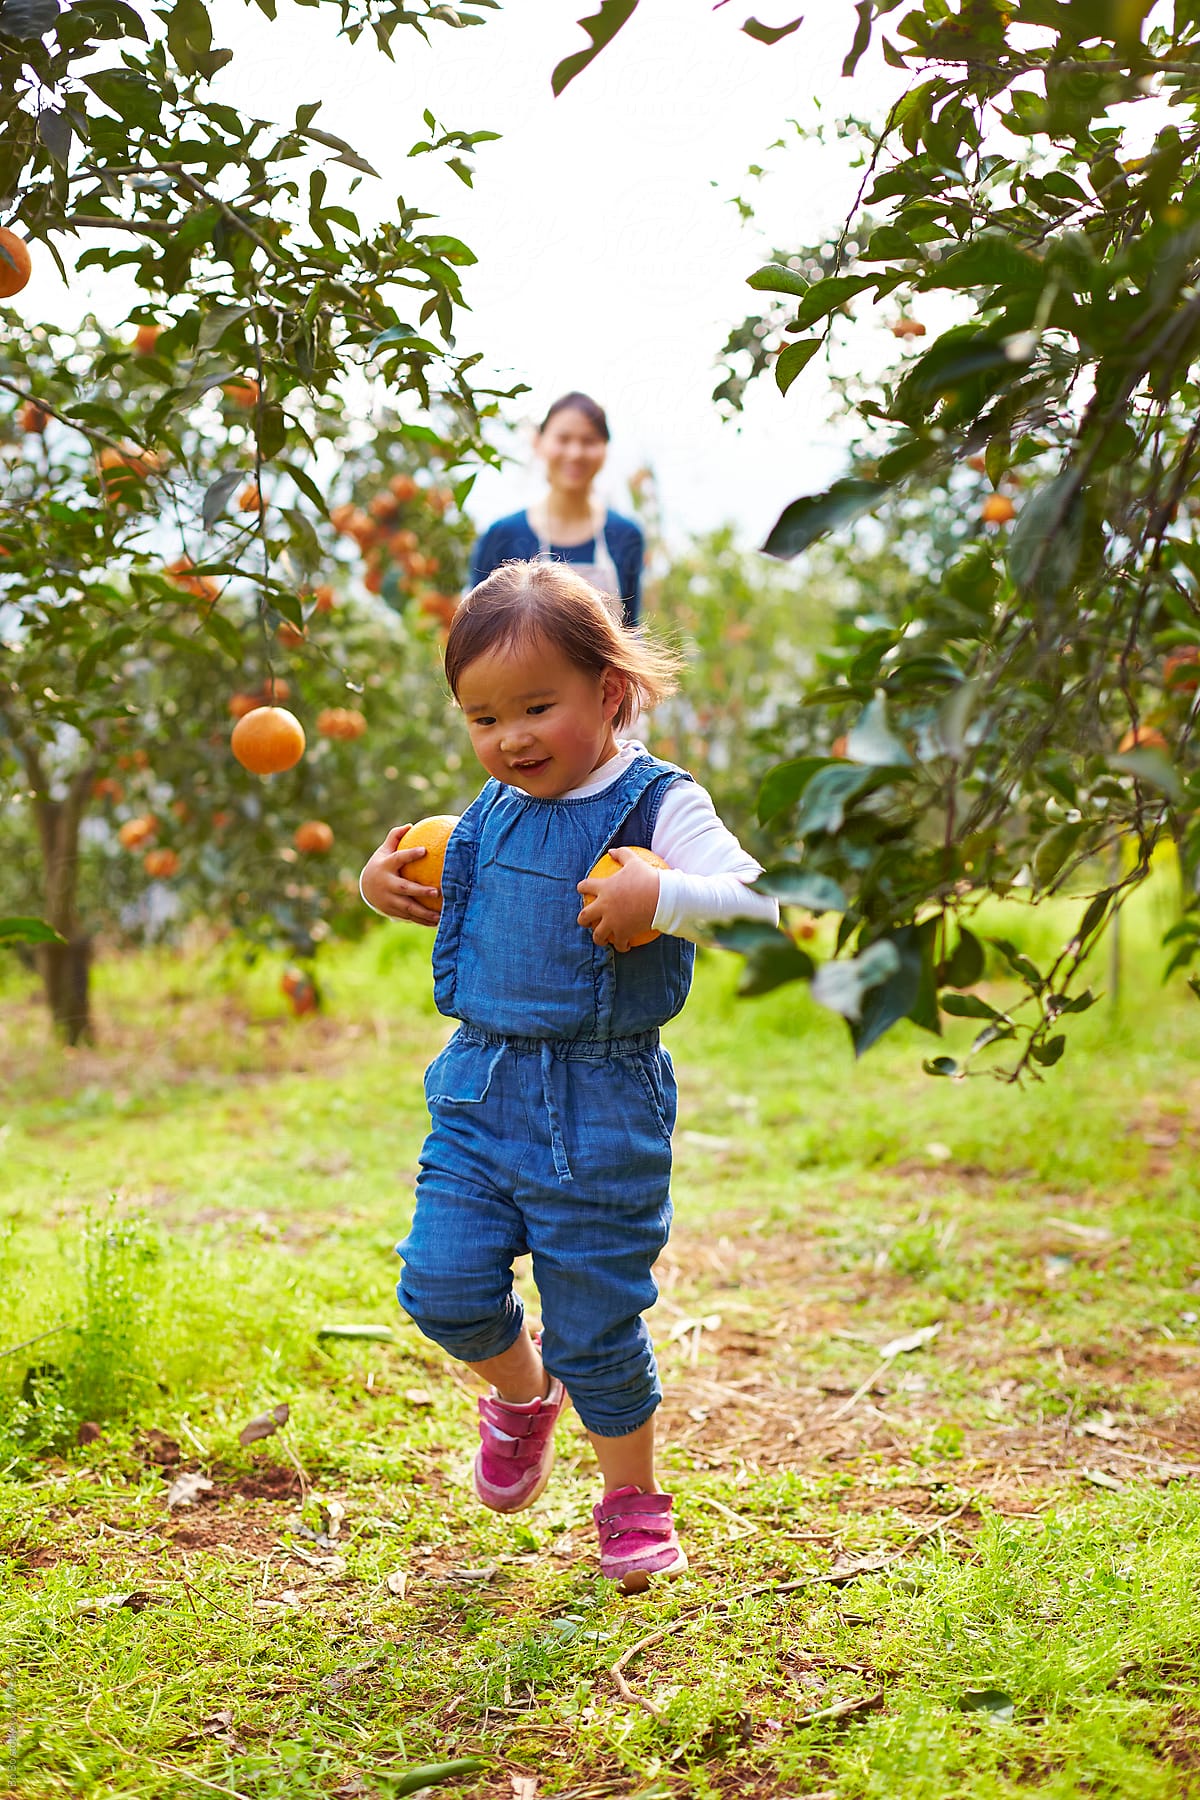 little asian girl with her mother in the orange farm